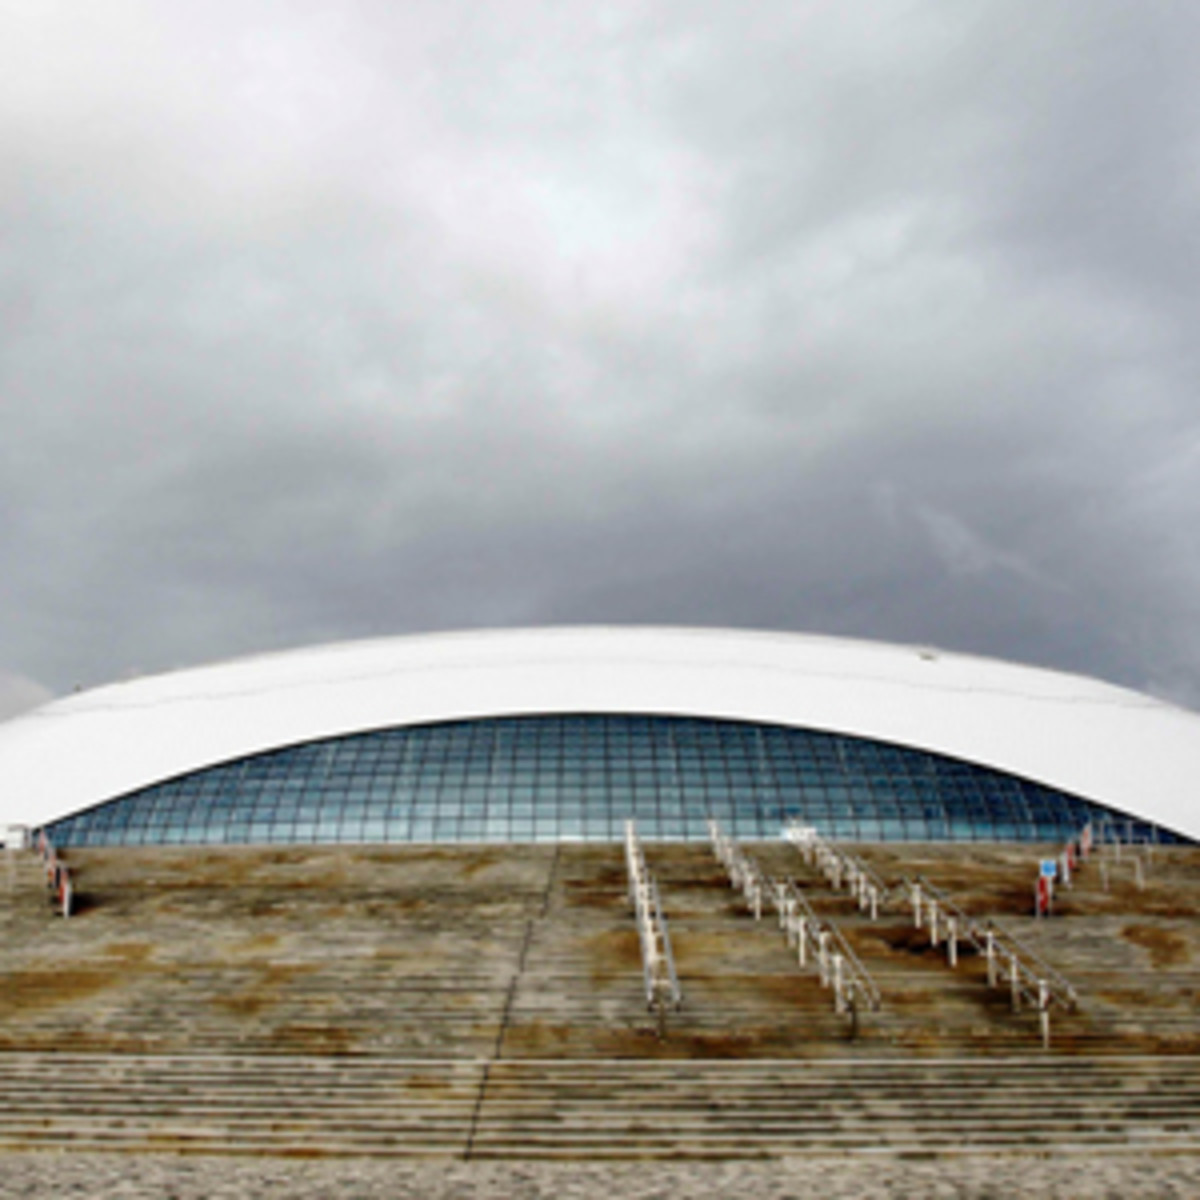 The Bolshoy Ice Dome will host hockey games during the 2014 Winter Olympics in Sochi, Russia. (Xavier Laine/Getty Images)